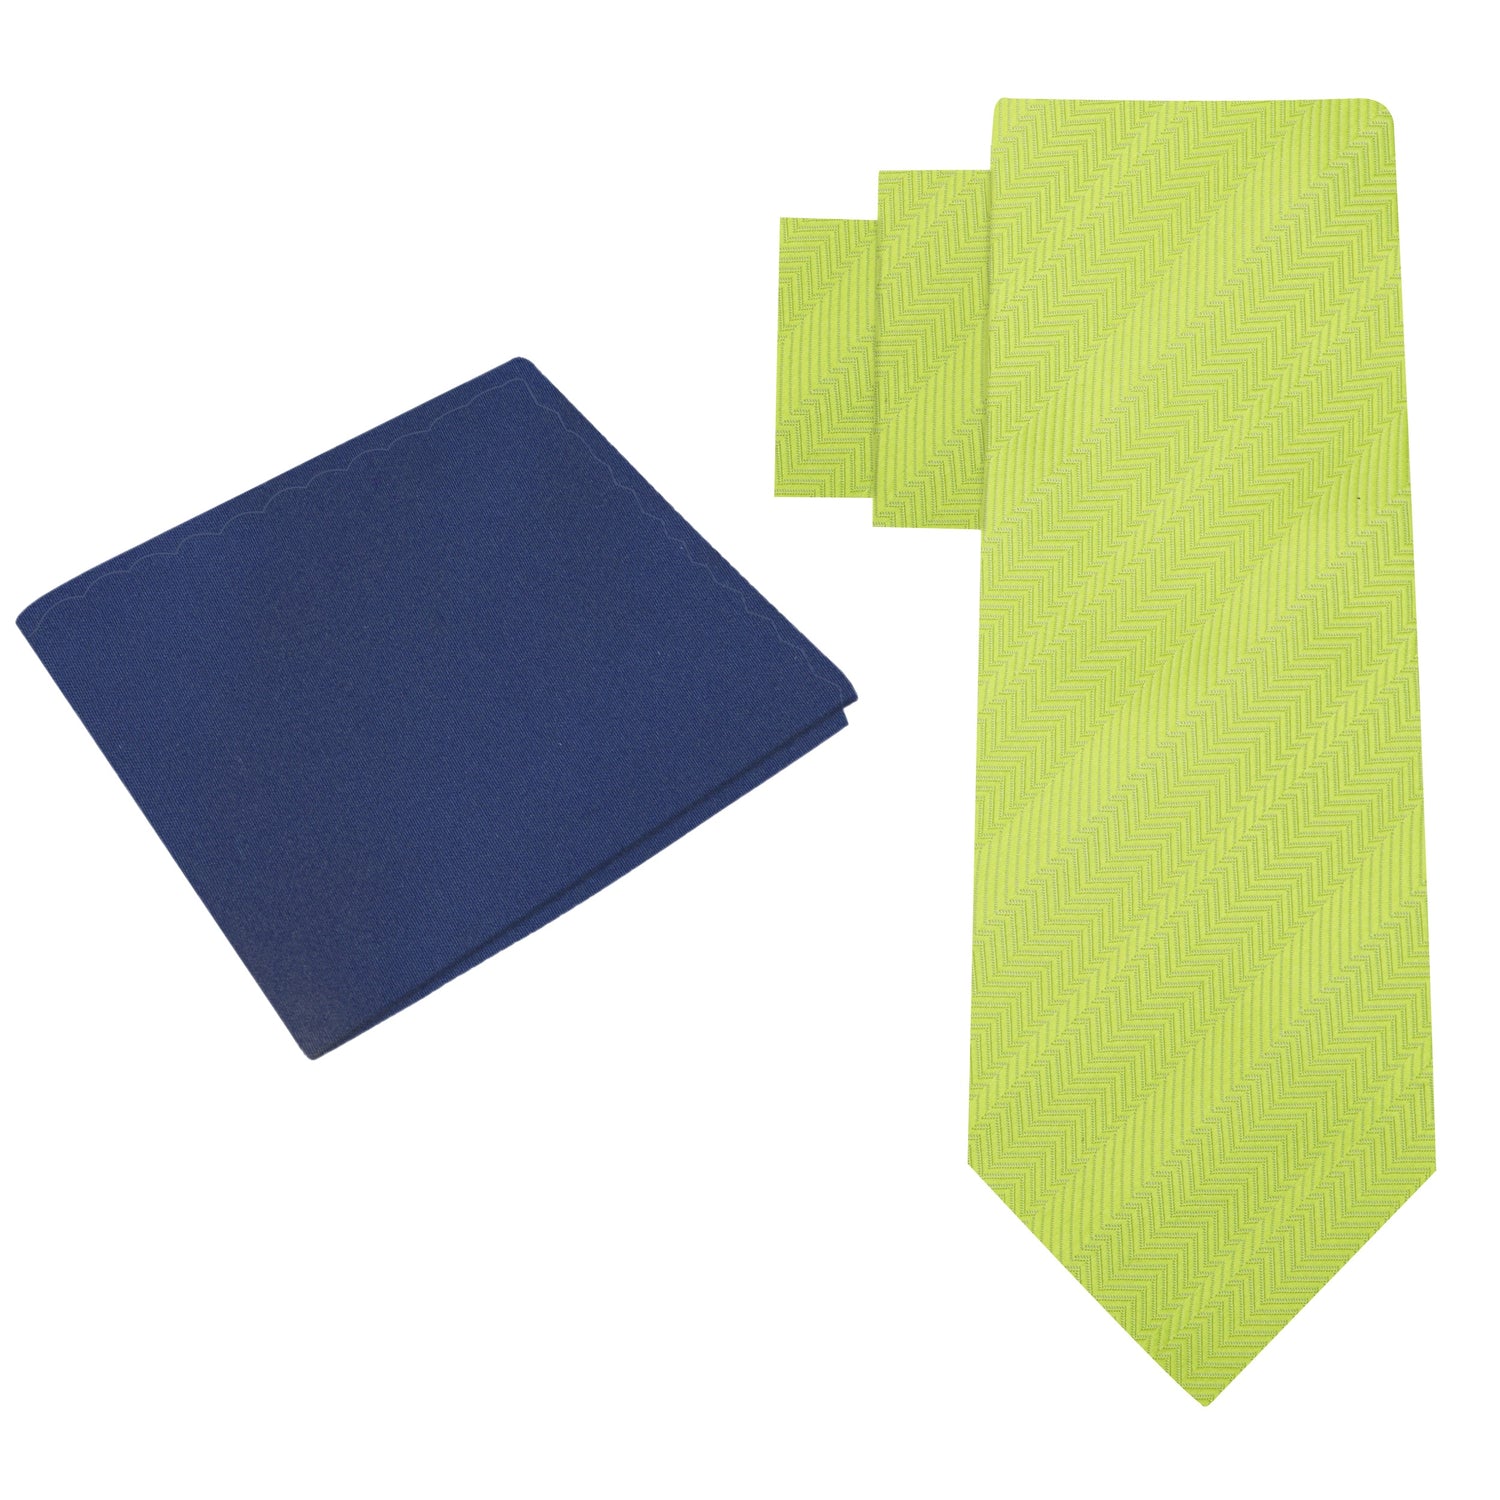 Alt view: Sophisticated Lime Green Necktie and Blue Square